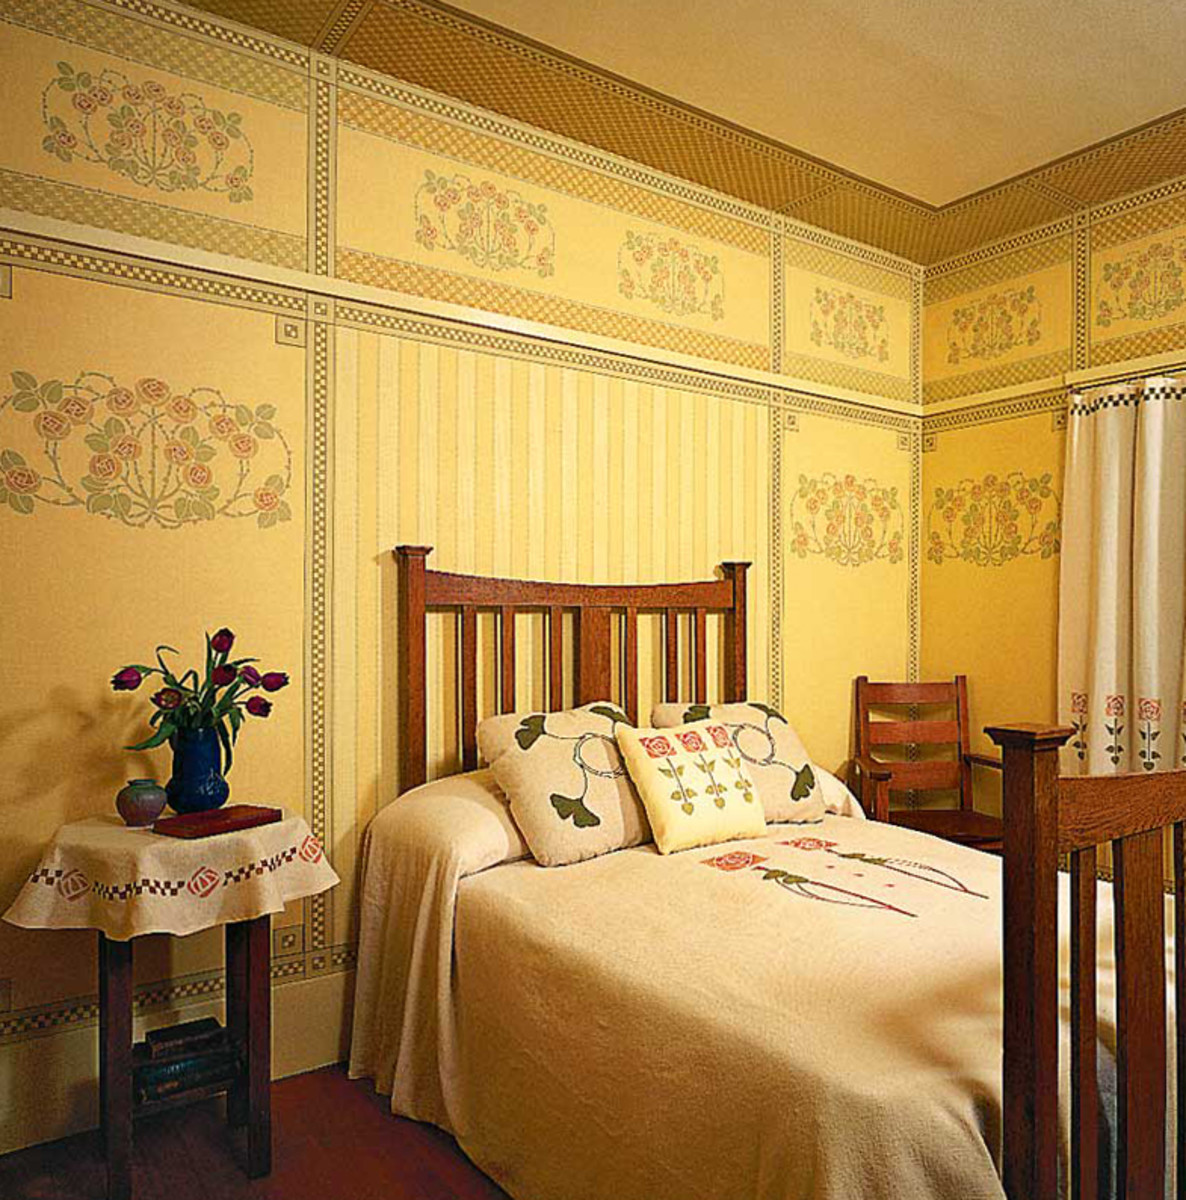 Stylized rose and striped papers reproduced by Bradbury for the Burnaby Village farmhouse in British Columbia. Hung as a frieze and panels, the papers create a post-Victorian room set.